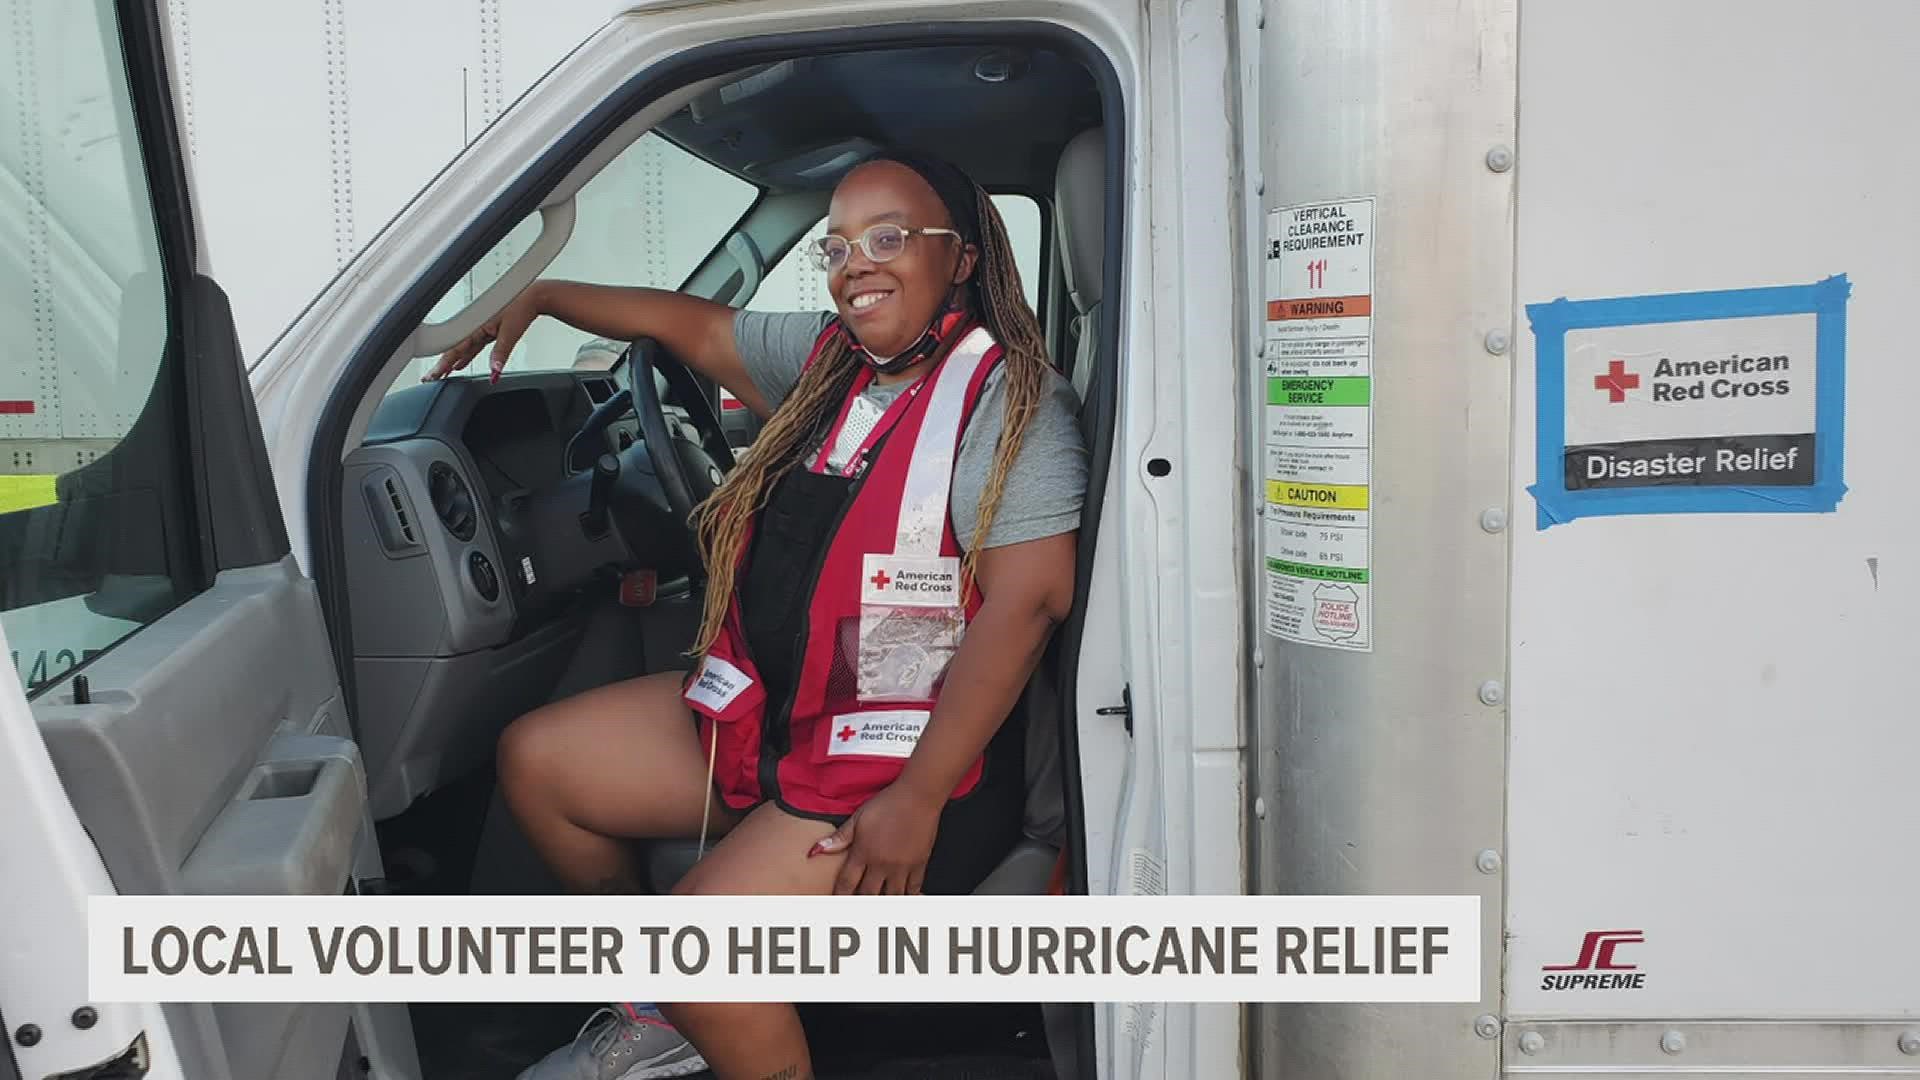 As the storm surges, the American Red Cross is beginning to load supplies and call up volunteers for relief efforts.